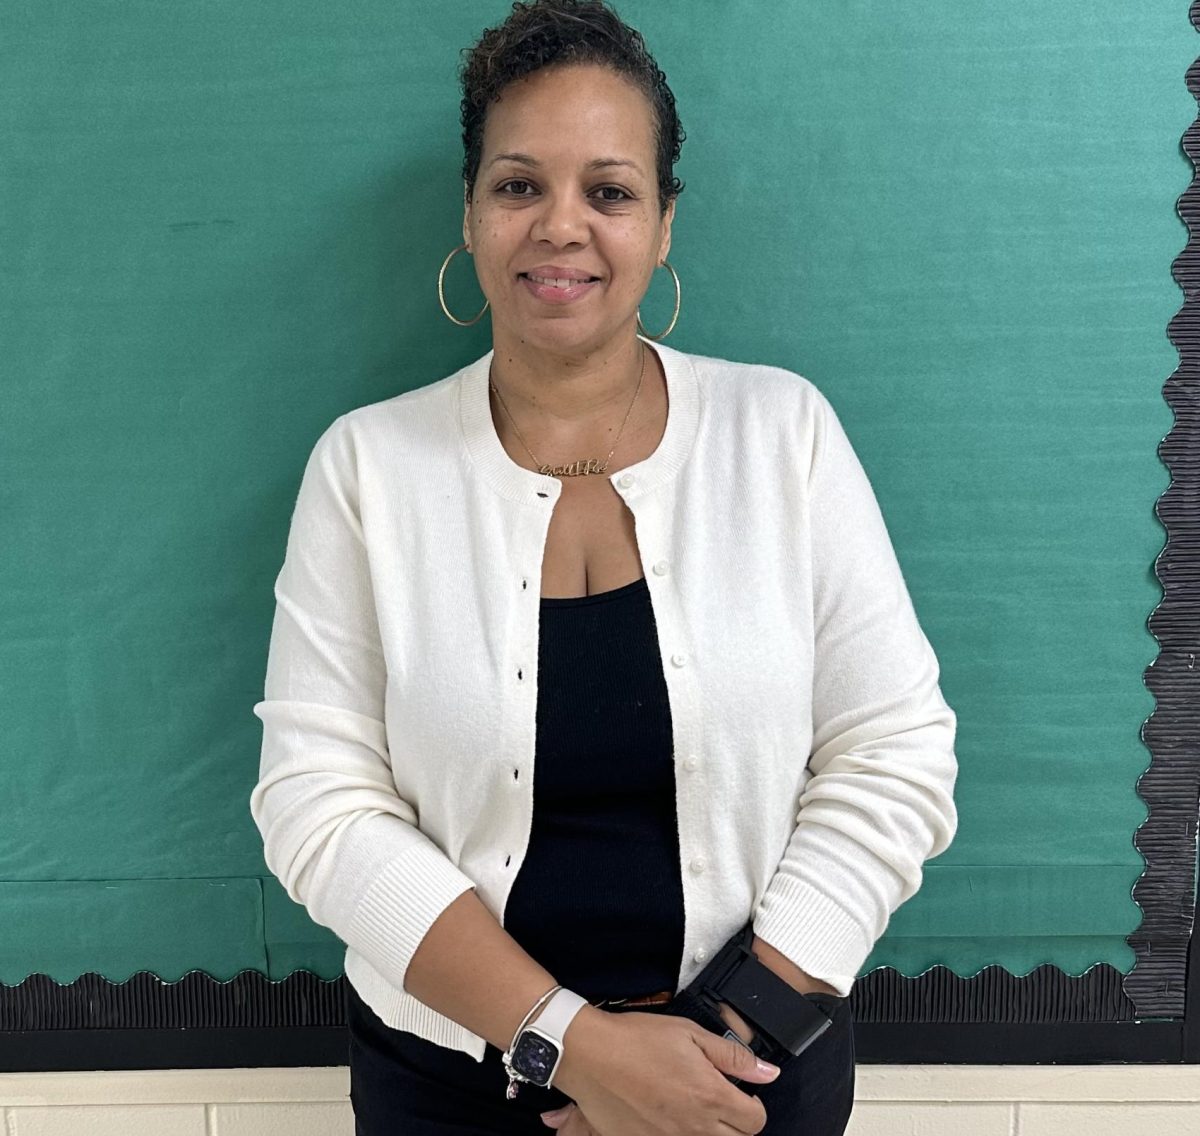 Shavon Evelyn, the 12-grade guidance counselor, helps students find the right path after graduation.